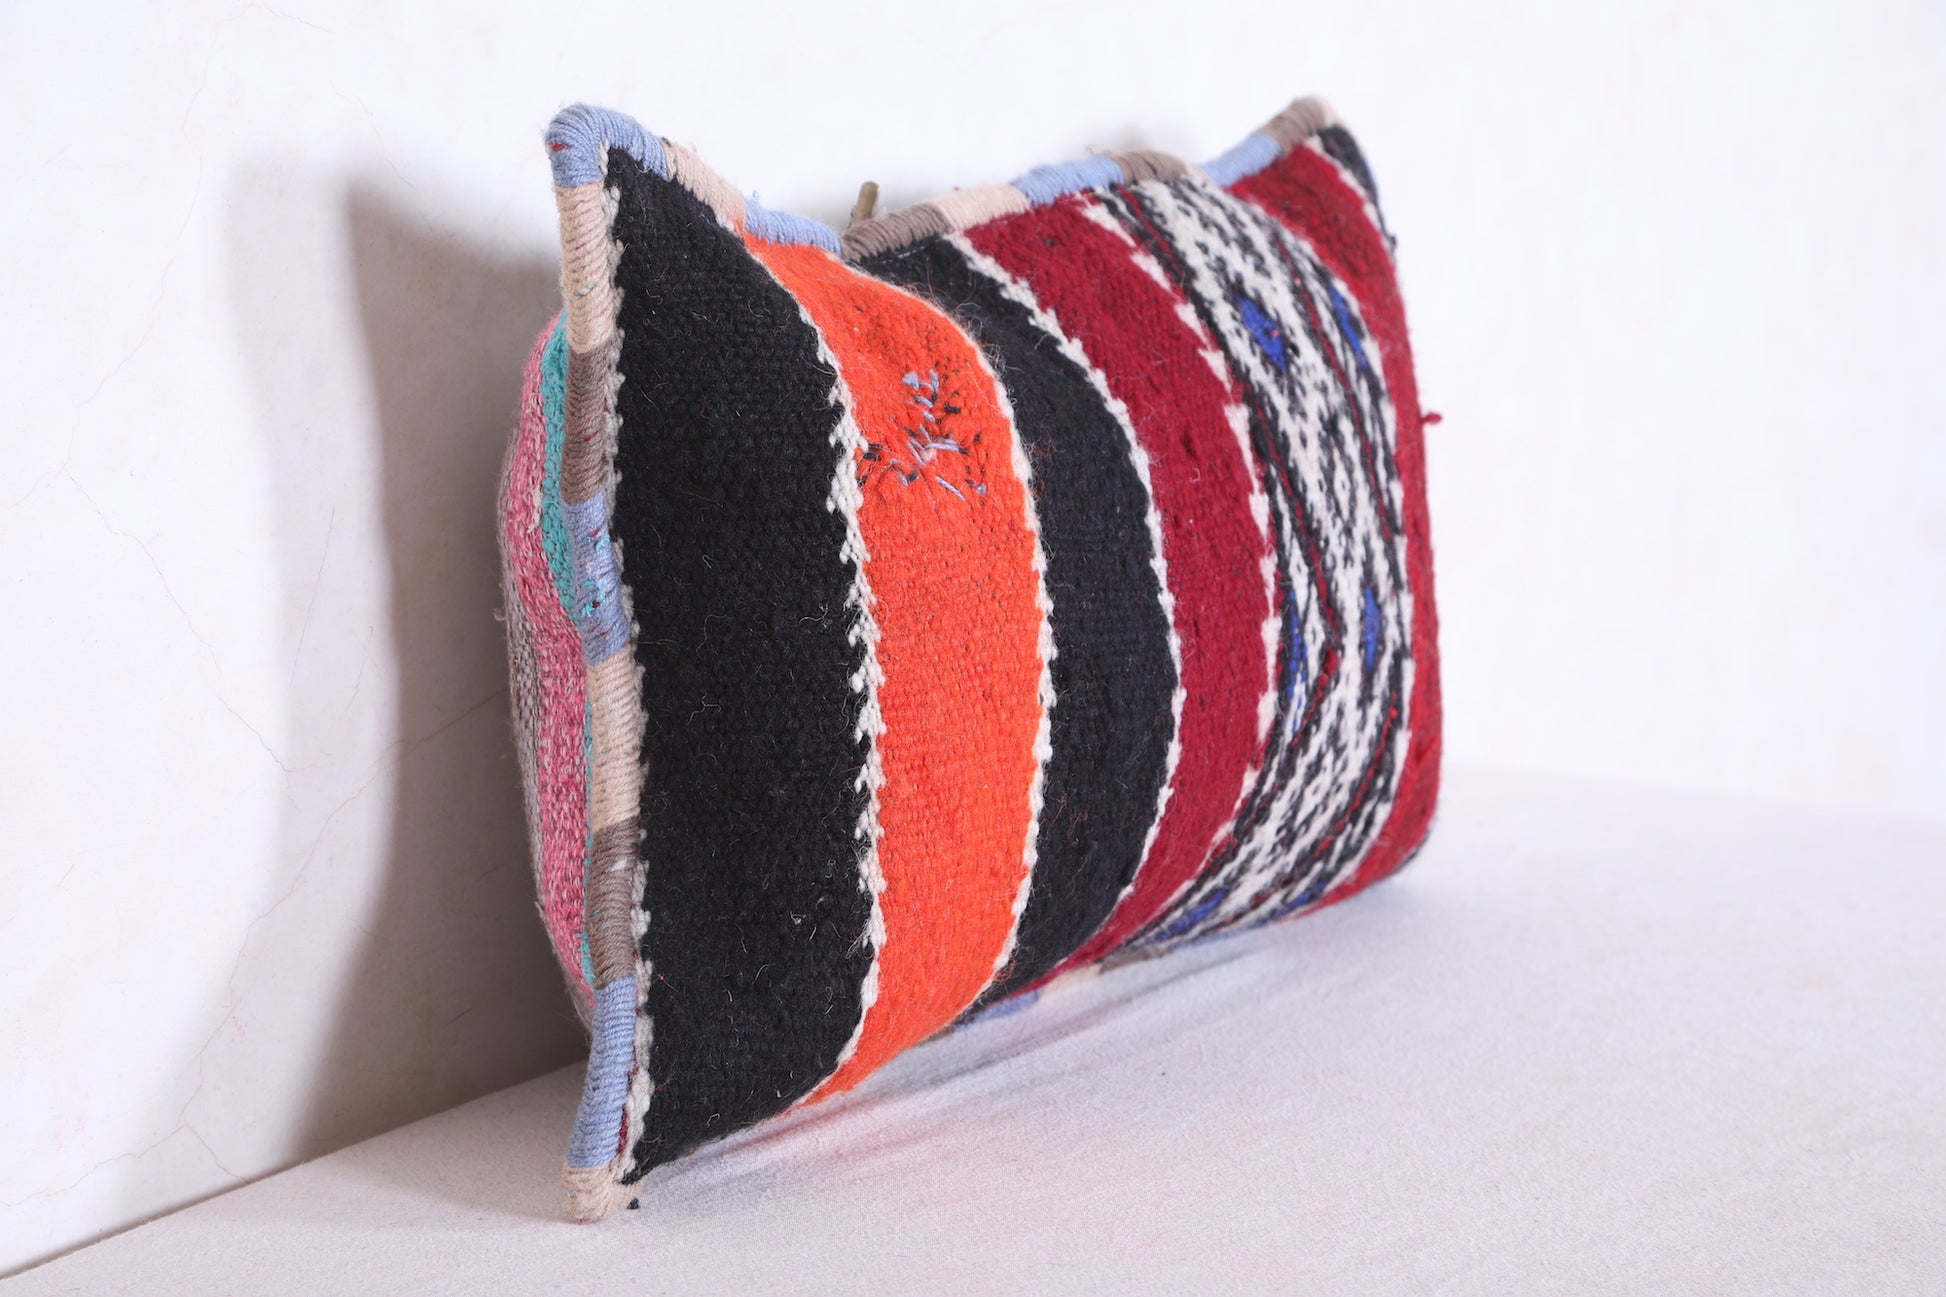 Moroccan handmade kilim pillow 14.1 INCHES X 21.2 INCHES